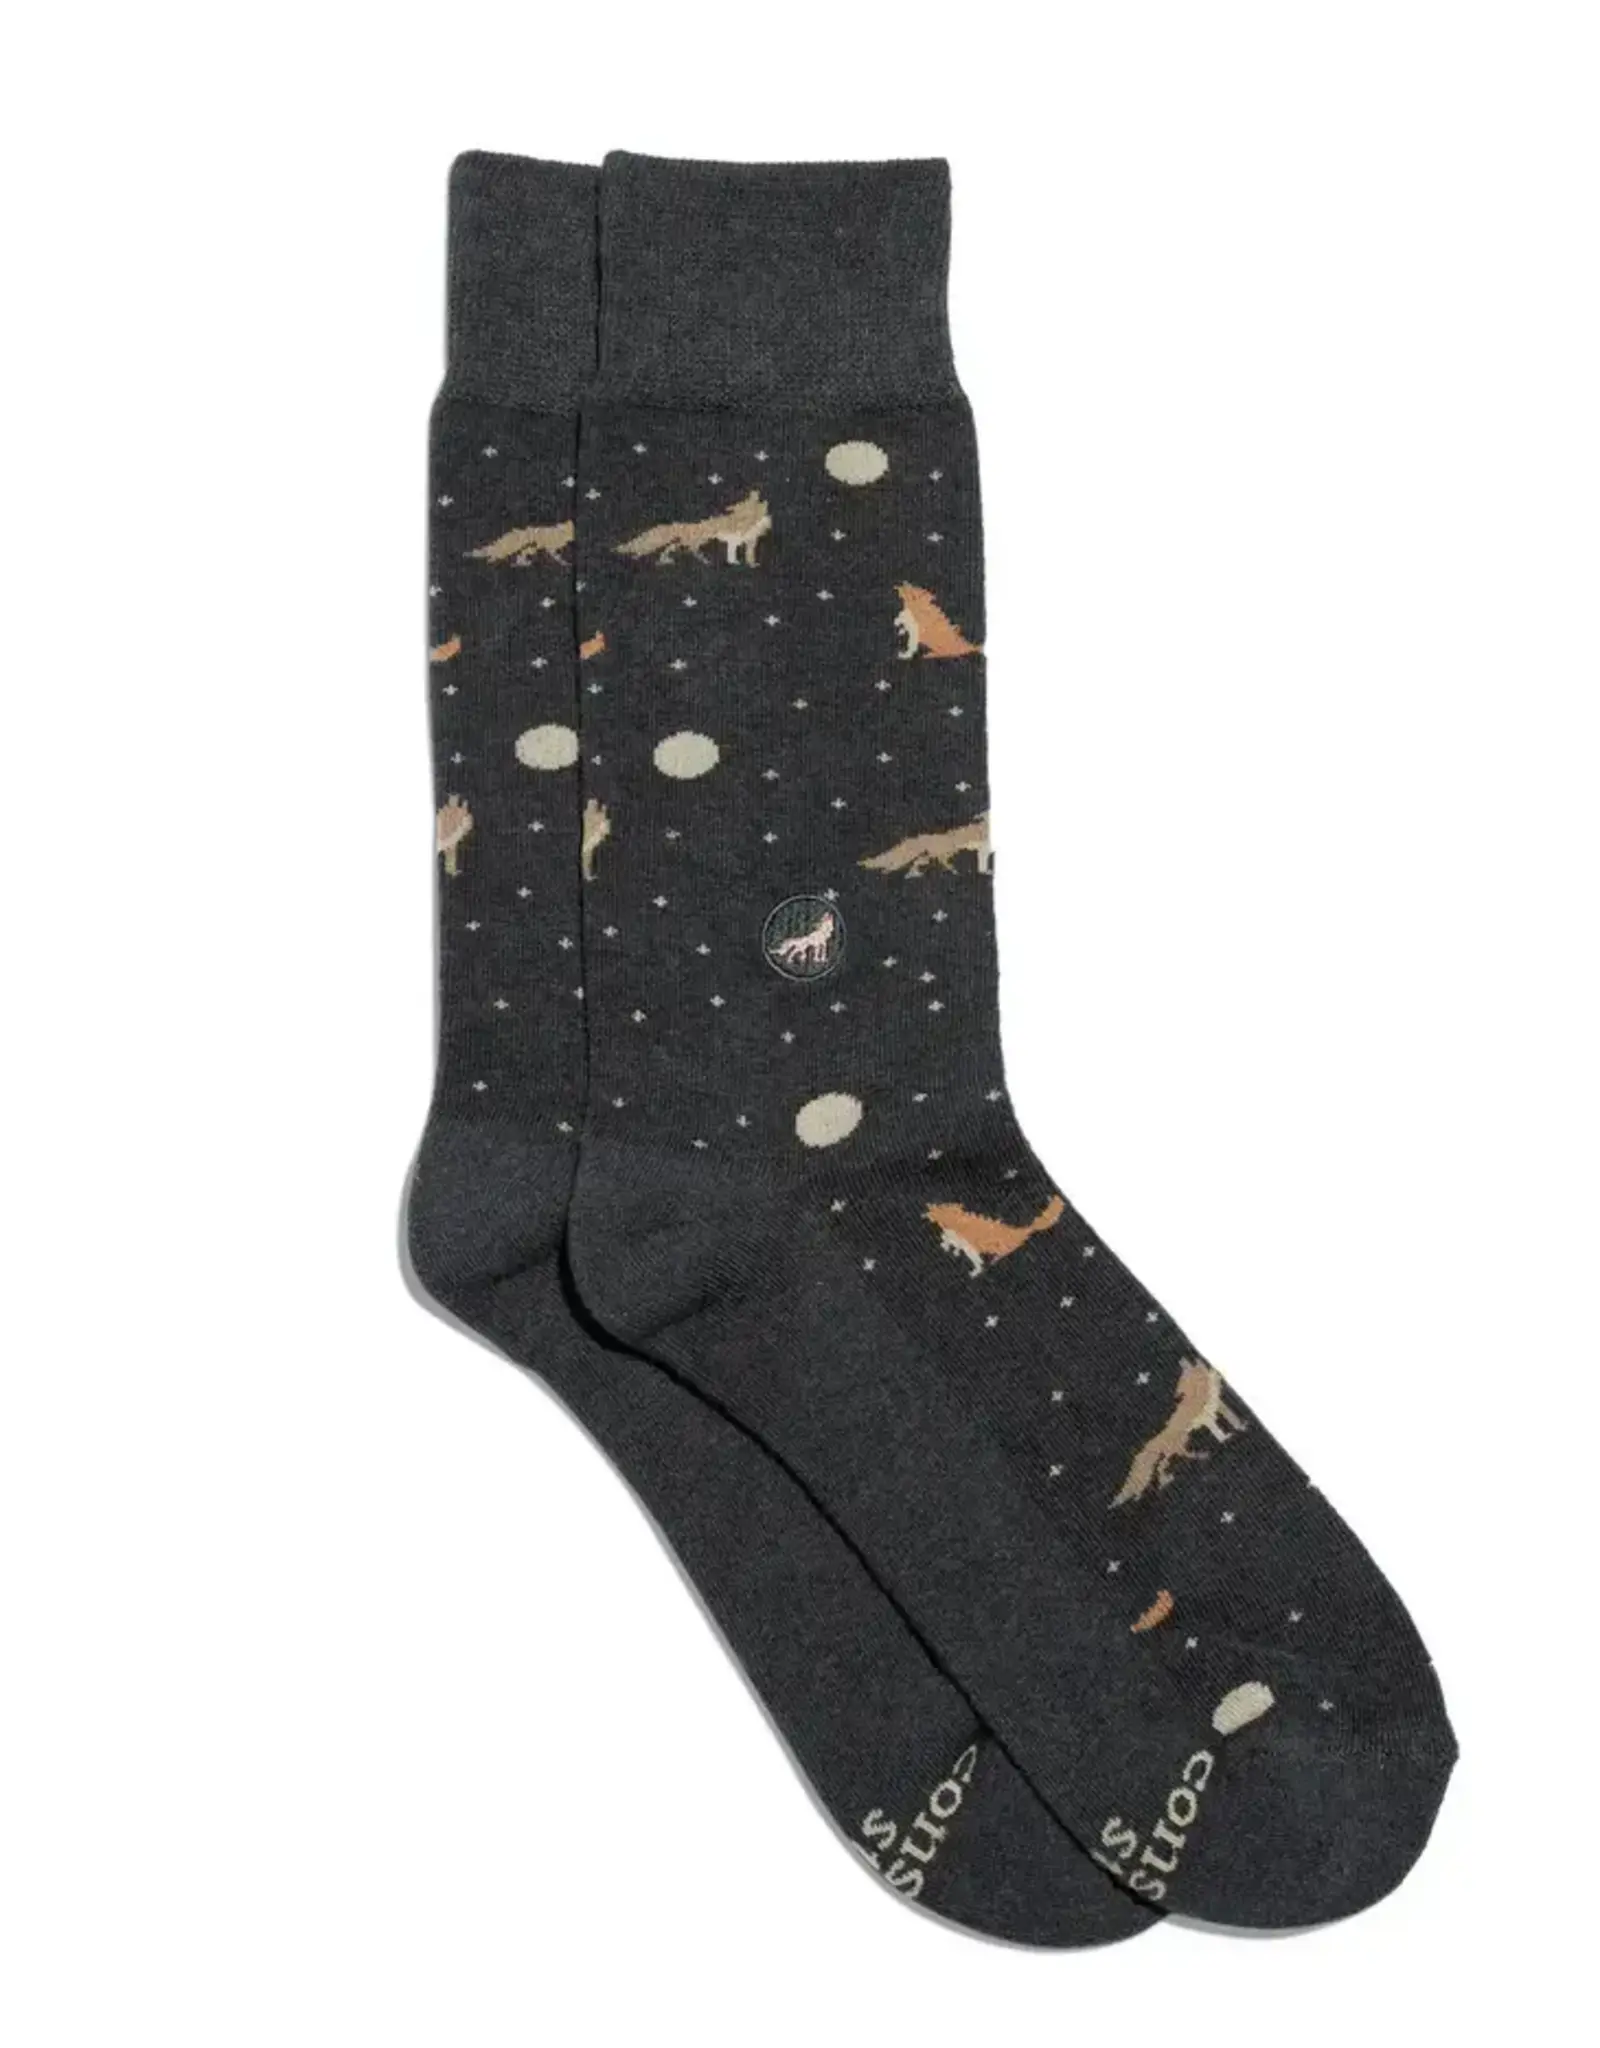 Conscious Step Socks that Protect Wolves